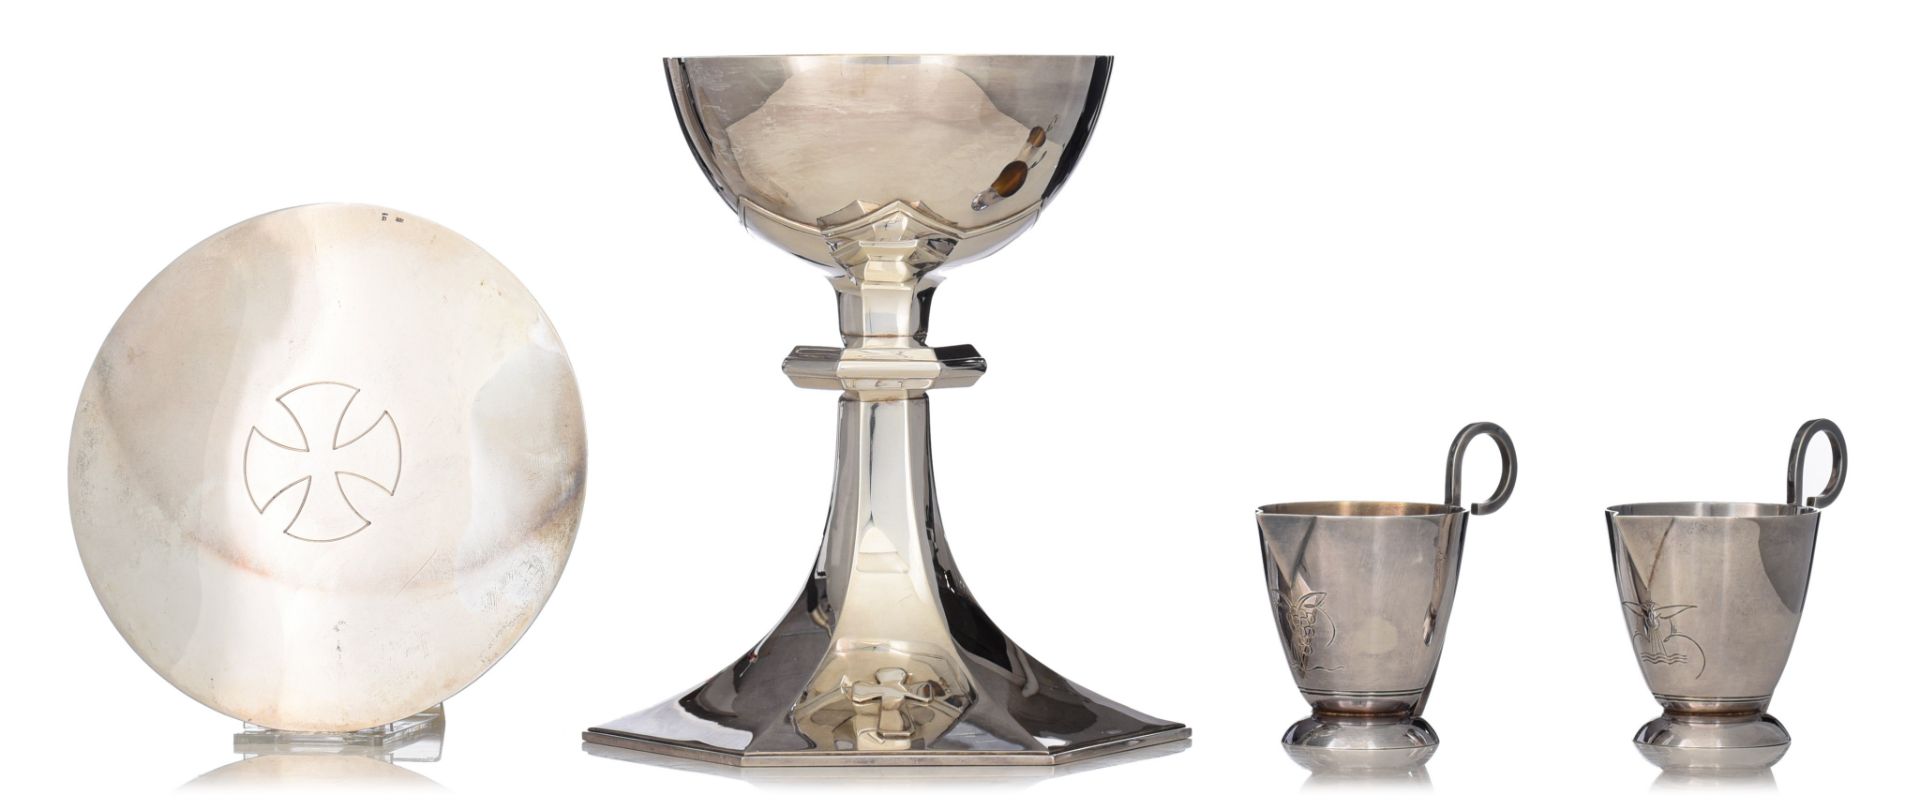 Two Art Deco style silver and gilt silver chalices and patens, in their original cassette, H 17 - 18